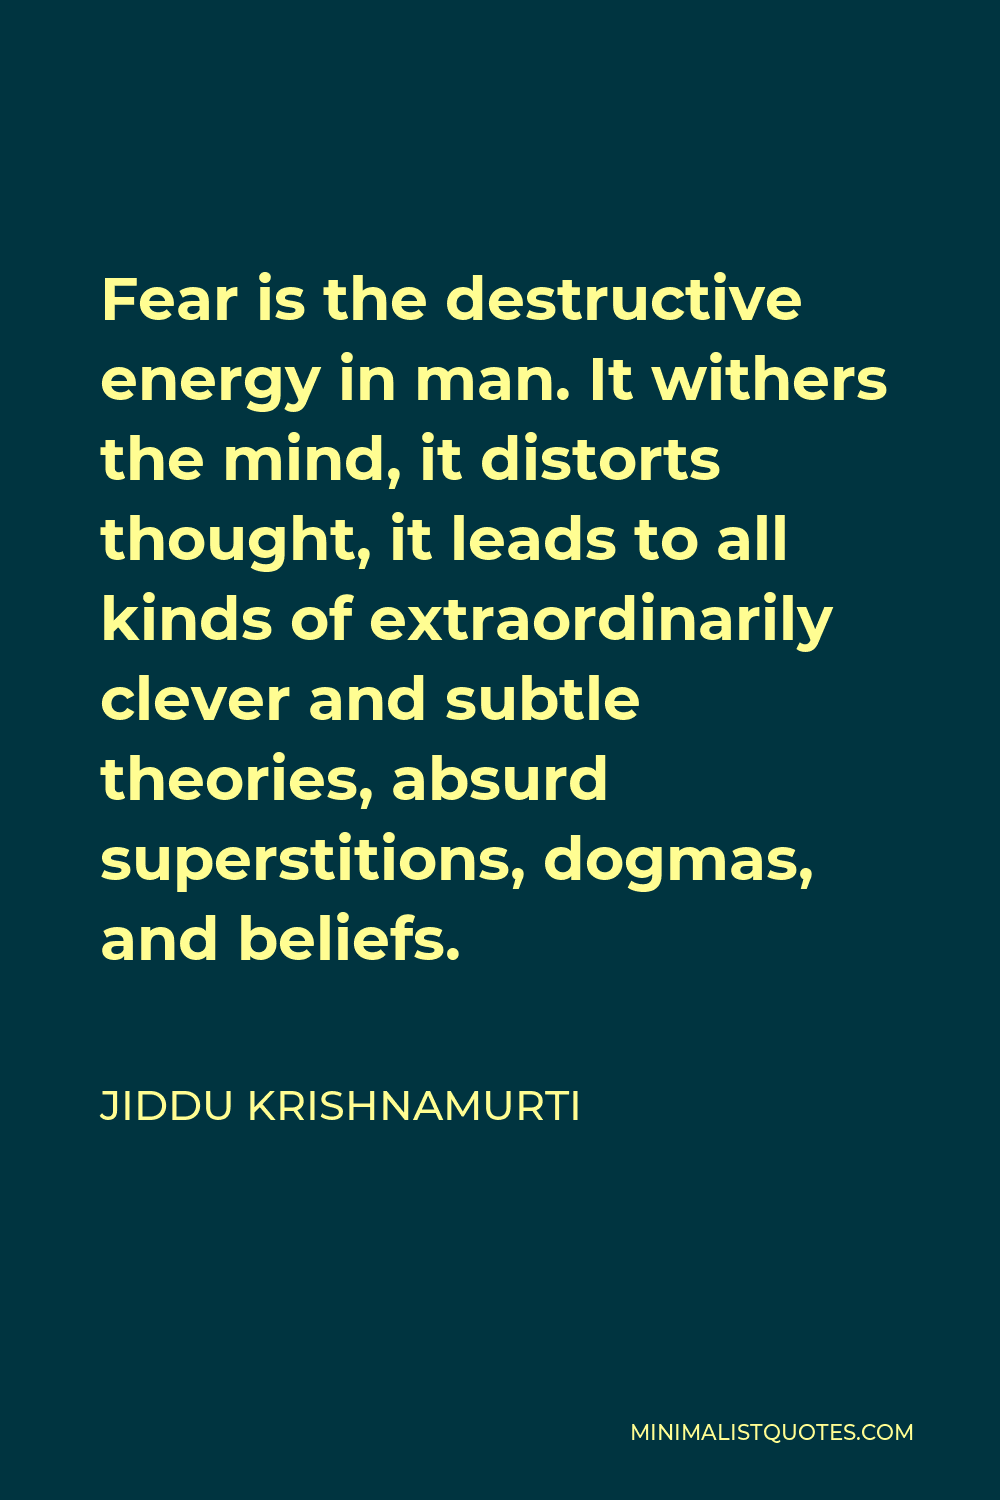 Jiddu Krishnamurti Quote - Fear is the destructive energy in man. It withers the mind, it distorts thought, it leads to all kinds of extraordinarily clever and subtle theories, absurd superstitions, dogmas, and beliefs.